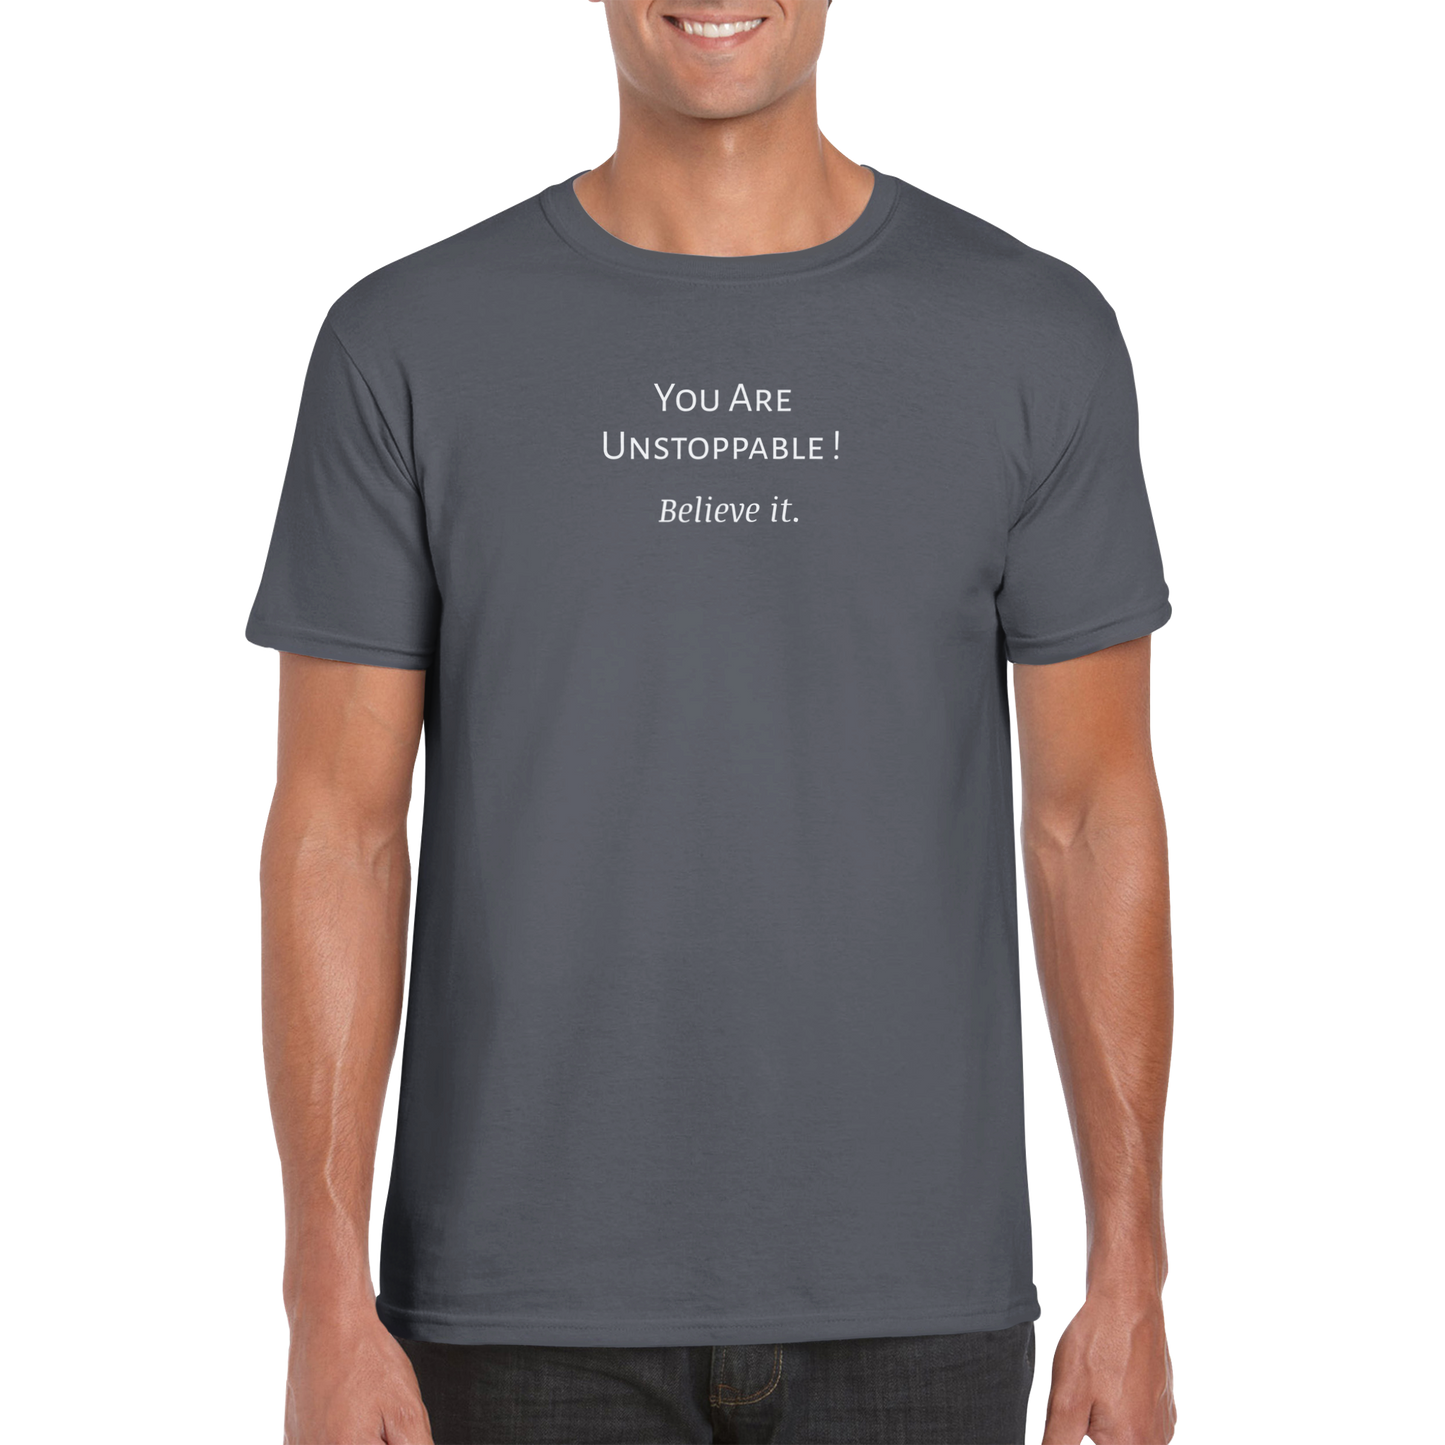 You Are Unstoppable! T-shirt.  Wear it and share it forward.